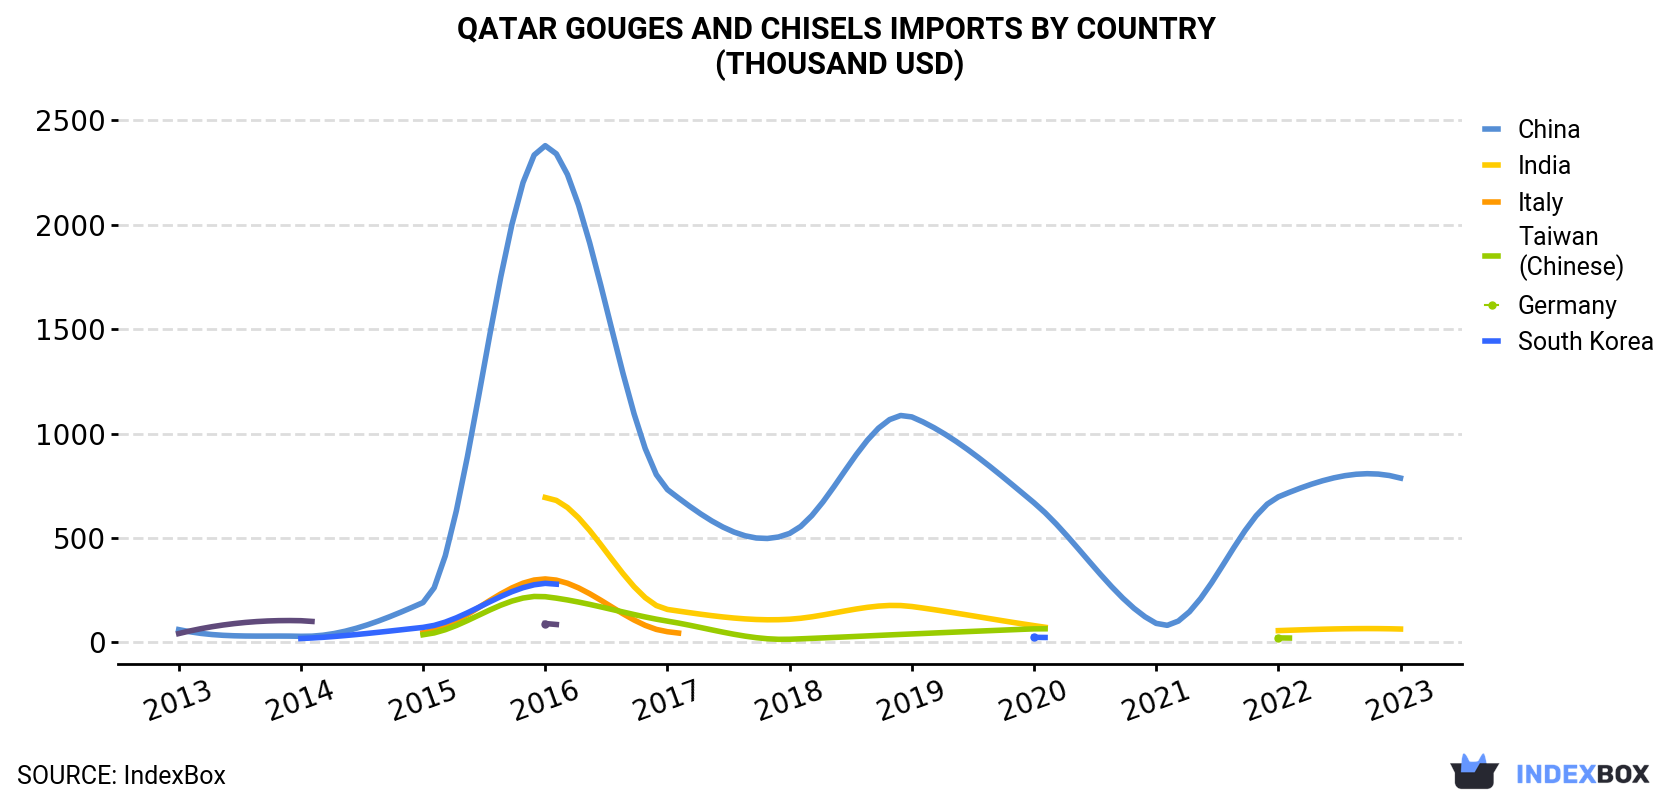 Qatar Gouges And Chisels Imports By Country (Thousand USD)